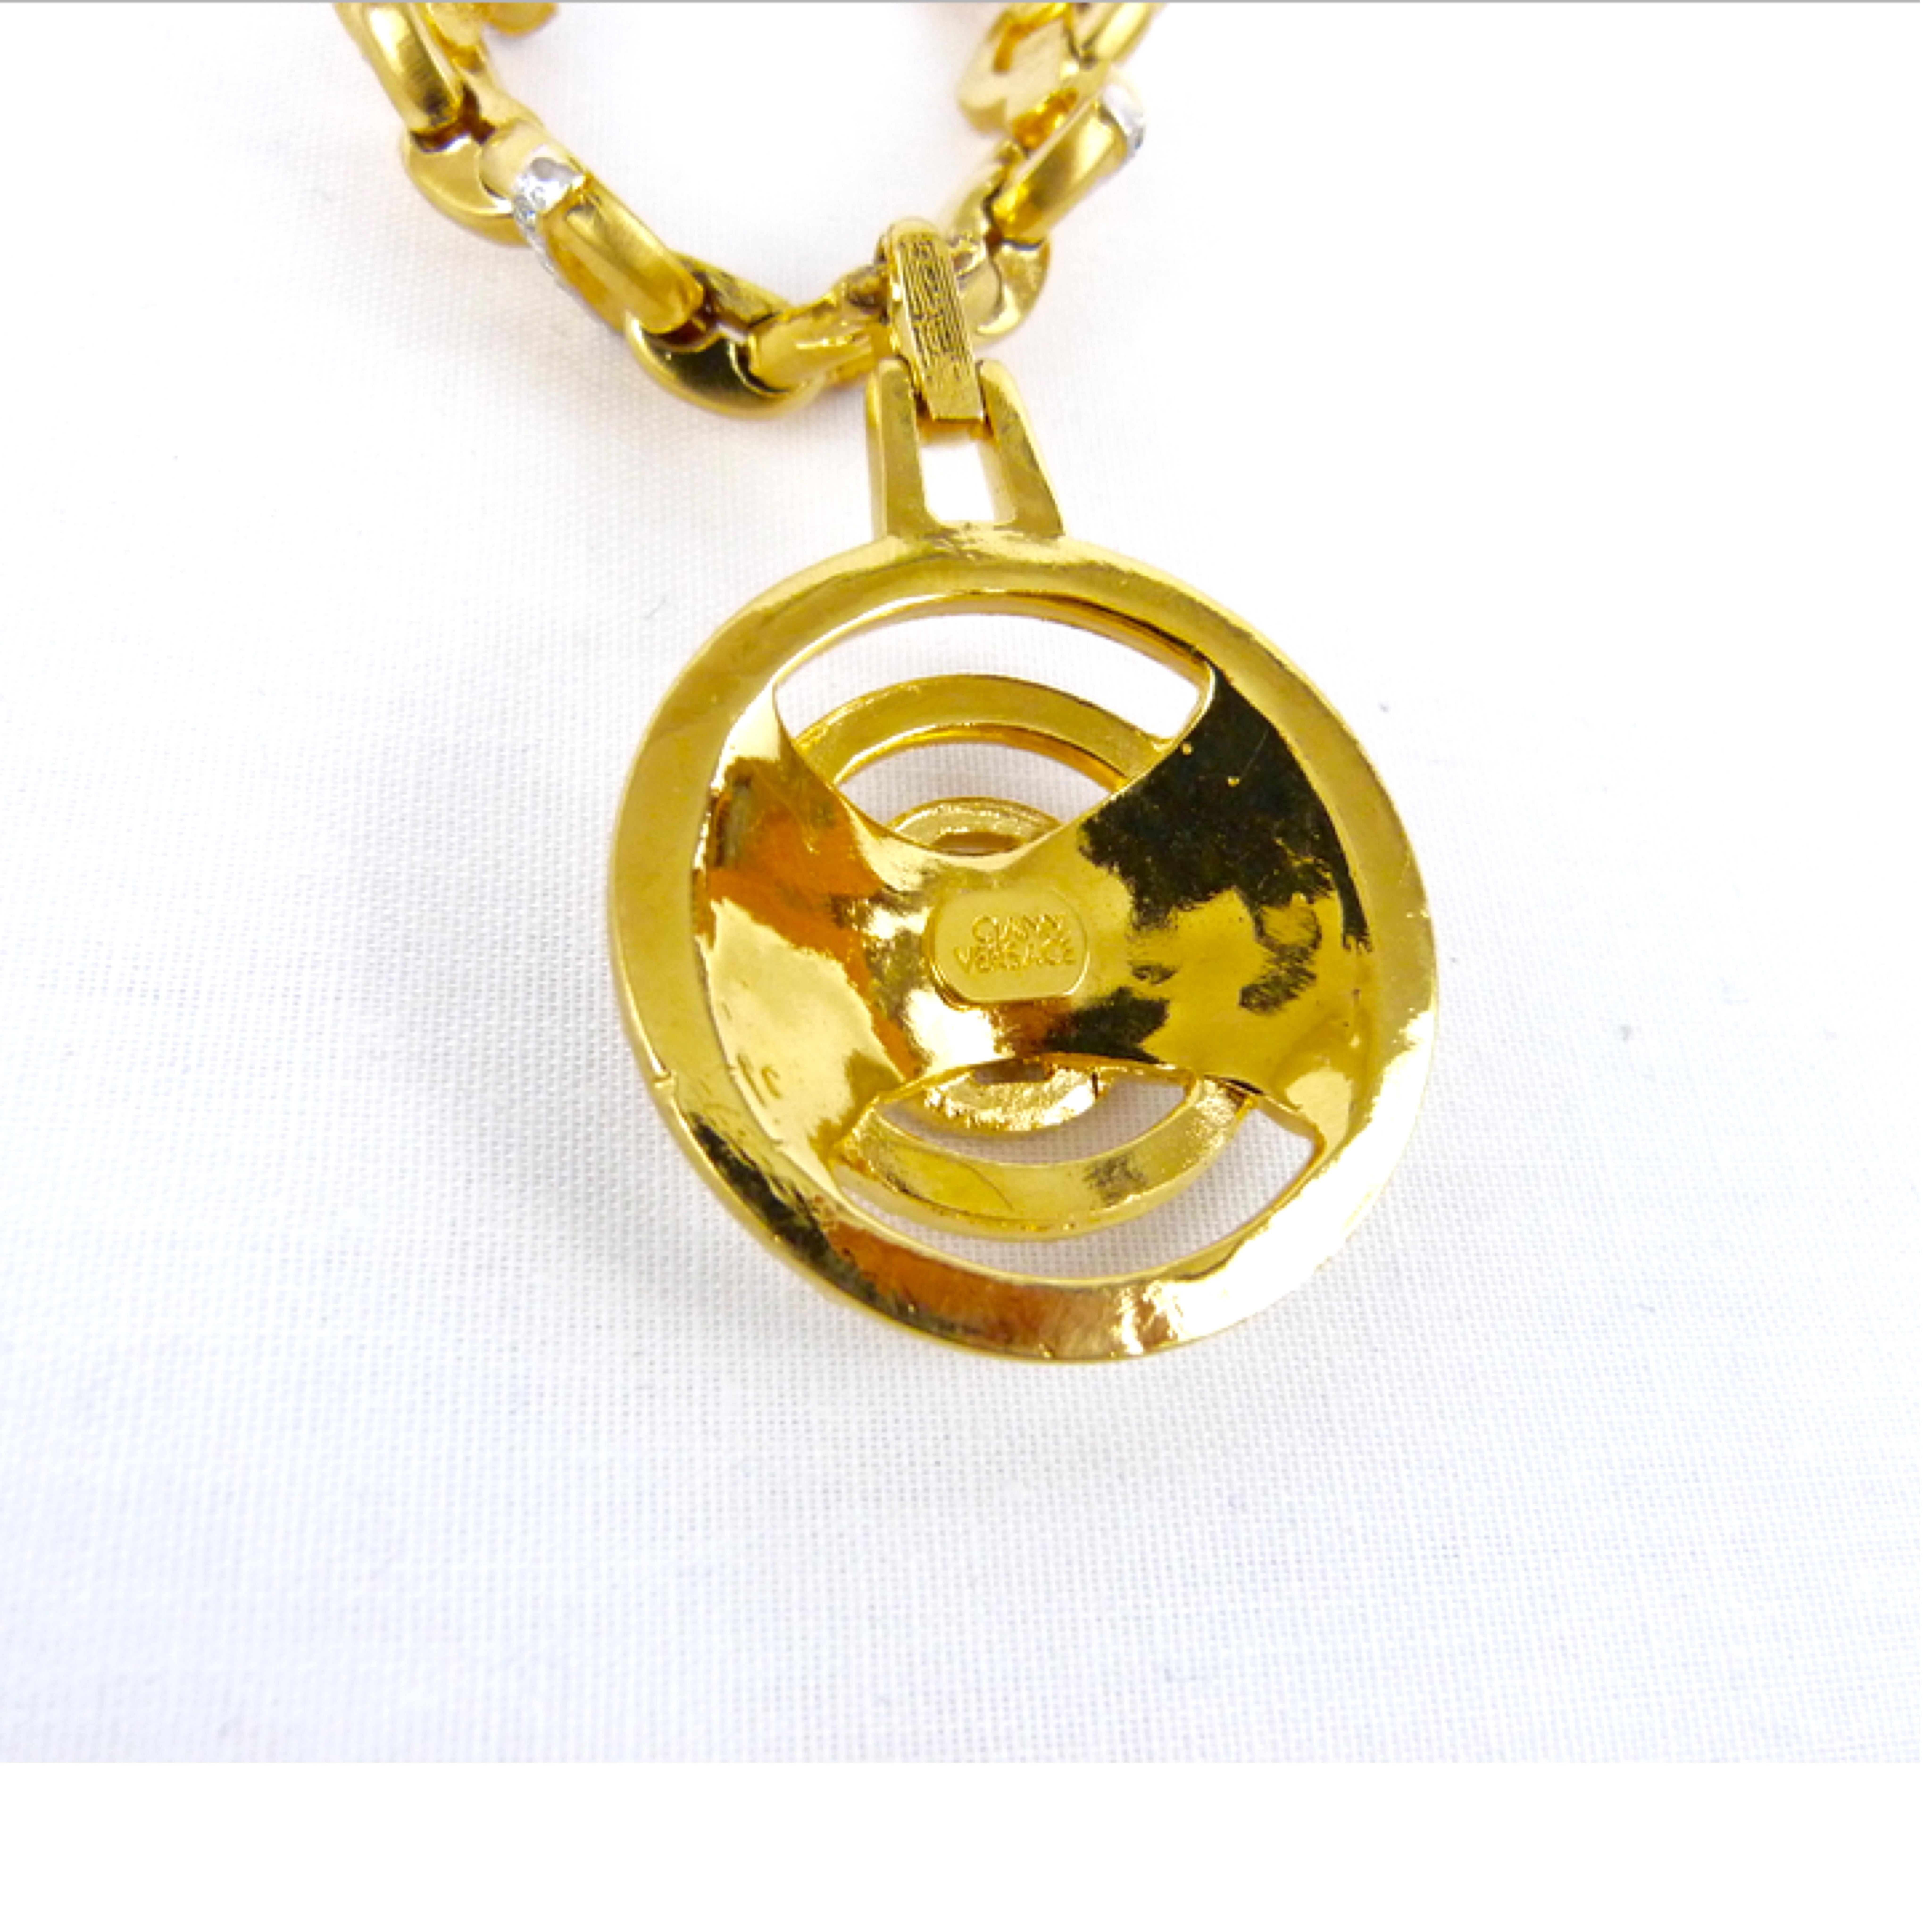 Gianni Versace 1990s gold circular necklace with medusa head pendant  1